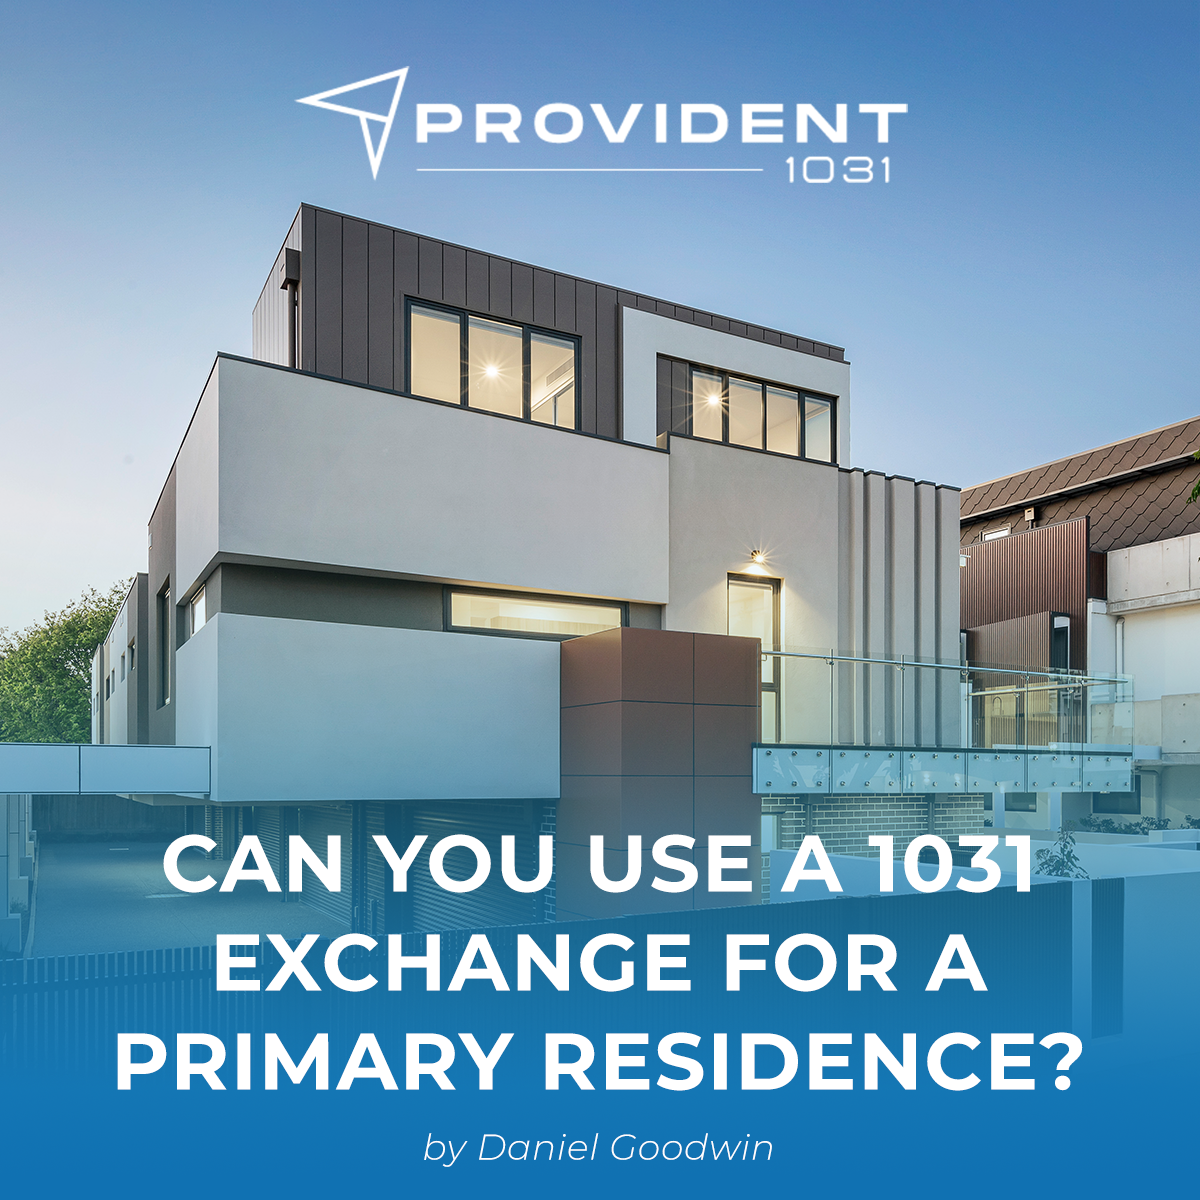 Can You Use A 1031 Exchange for A Primary Residence?